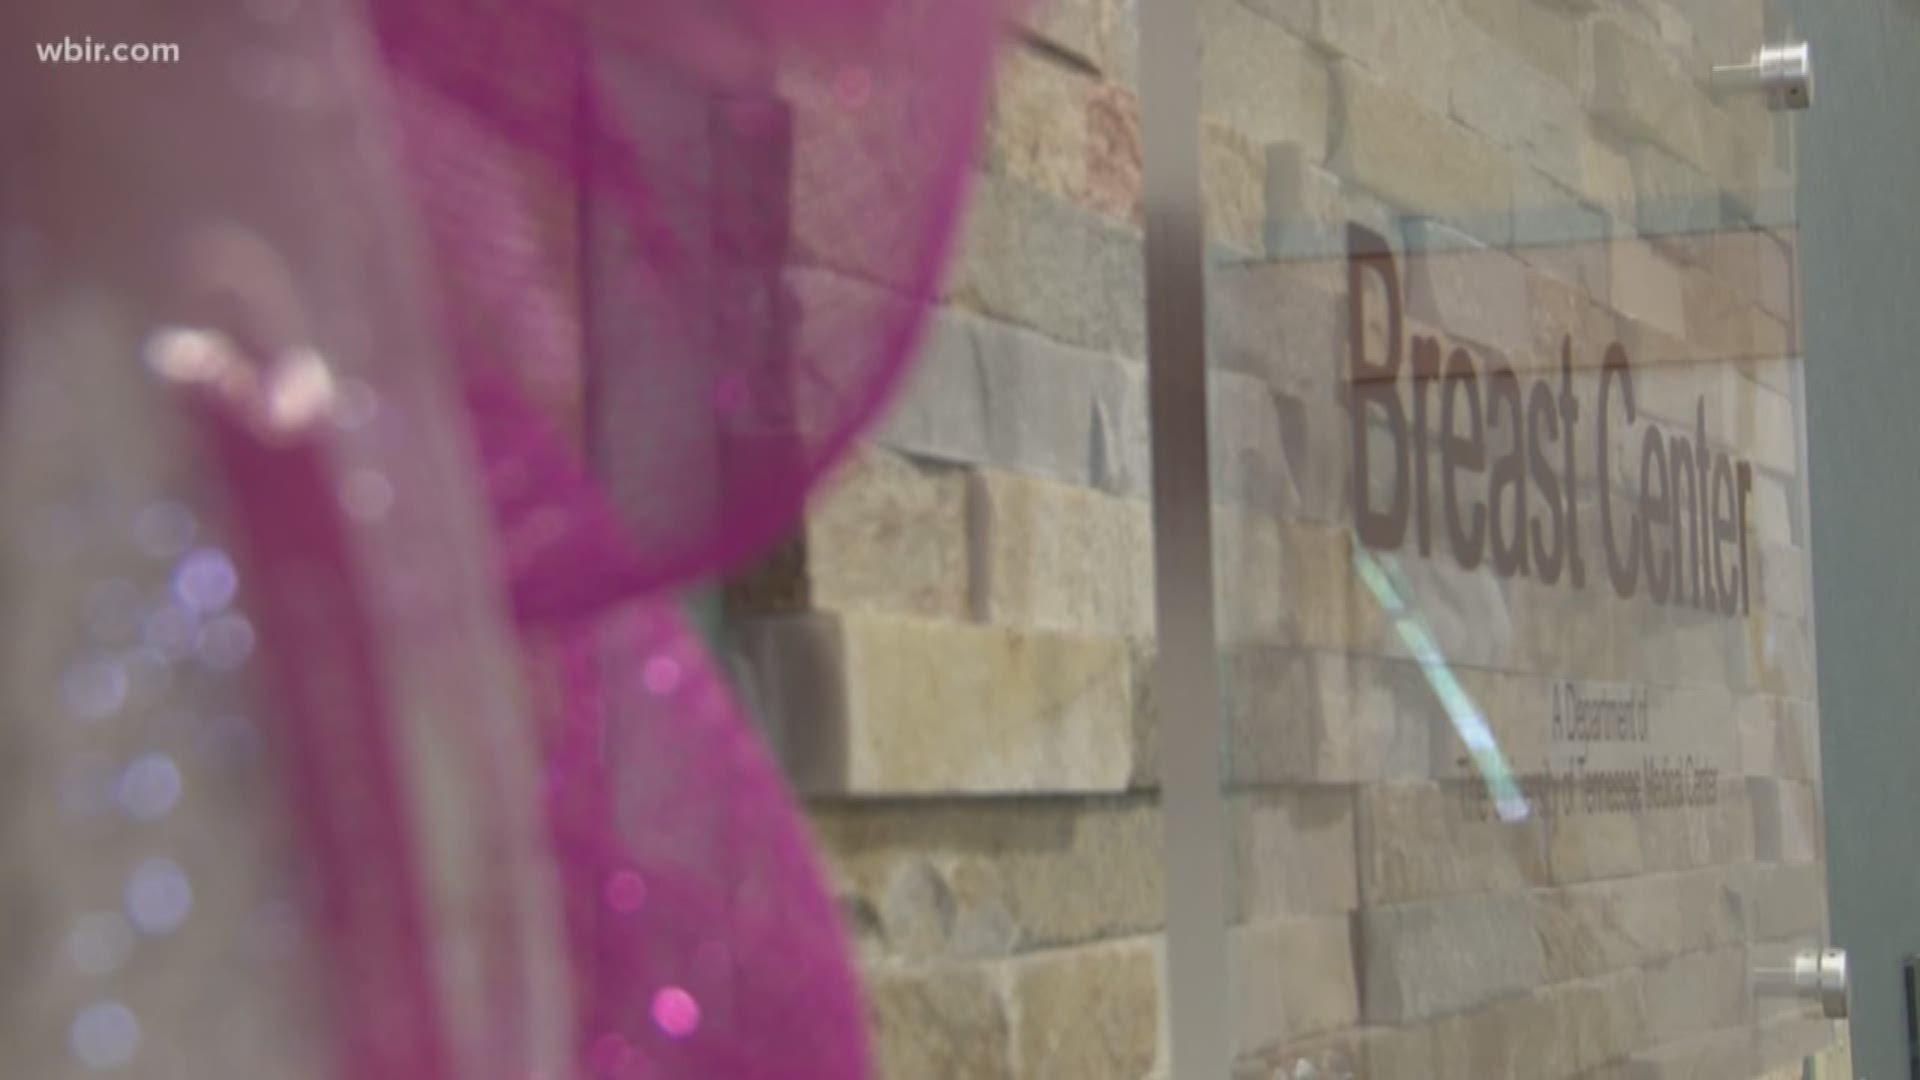 It's the tenth of the month which means it's time for Buddy Check 10. This month, 10 News reporter Katie Inman introduces us to the breast center manager at UT Medical Center. She works in the mammography department at the hospital but her connection to breast cancer hits close to home.